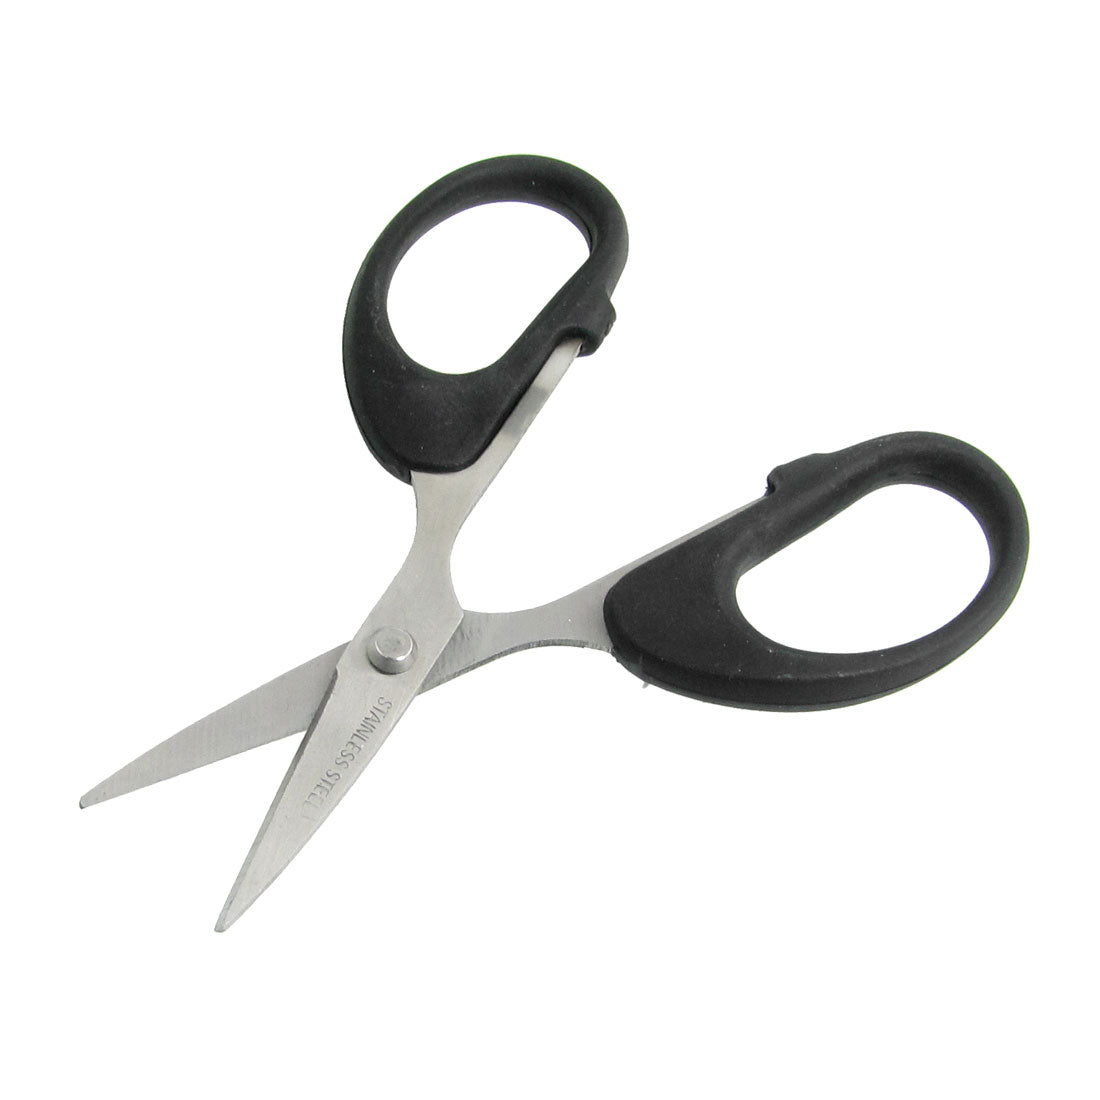 uxcell Uxcell Home Stainless Steel Blade Black Plastic Handle Sewing Paper Straight Scissors